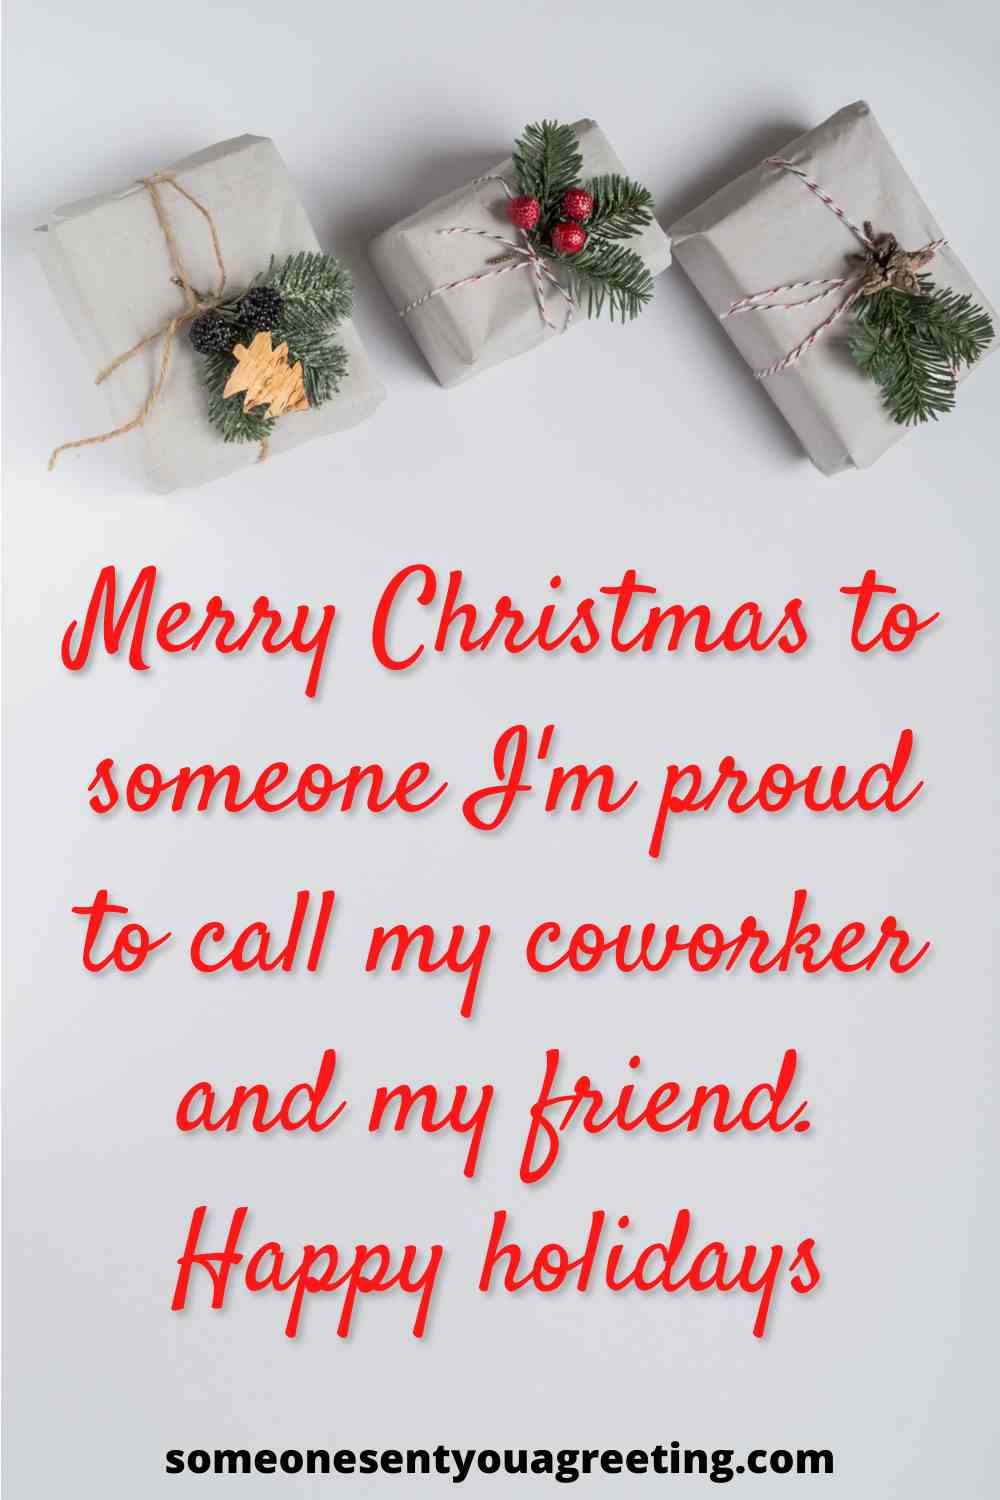 Christmas greeting for a coworker